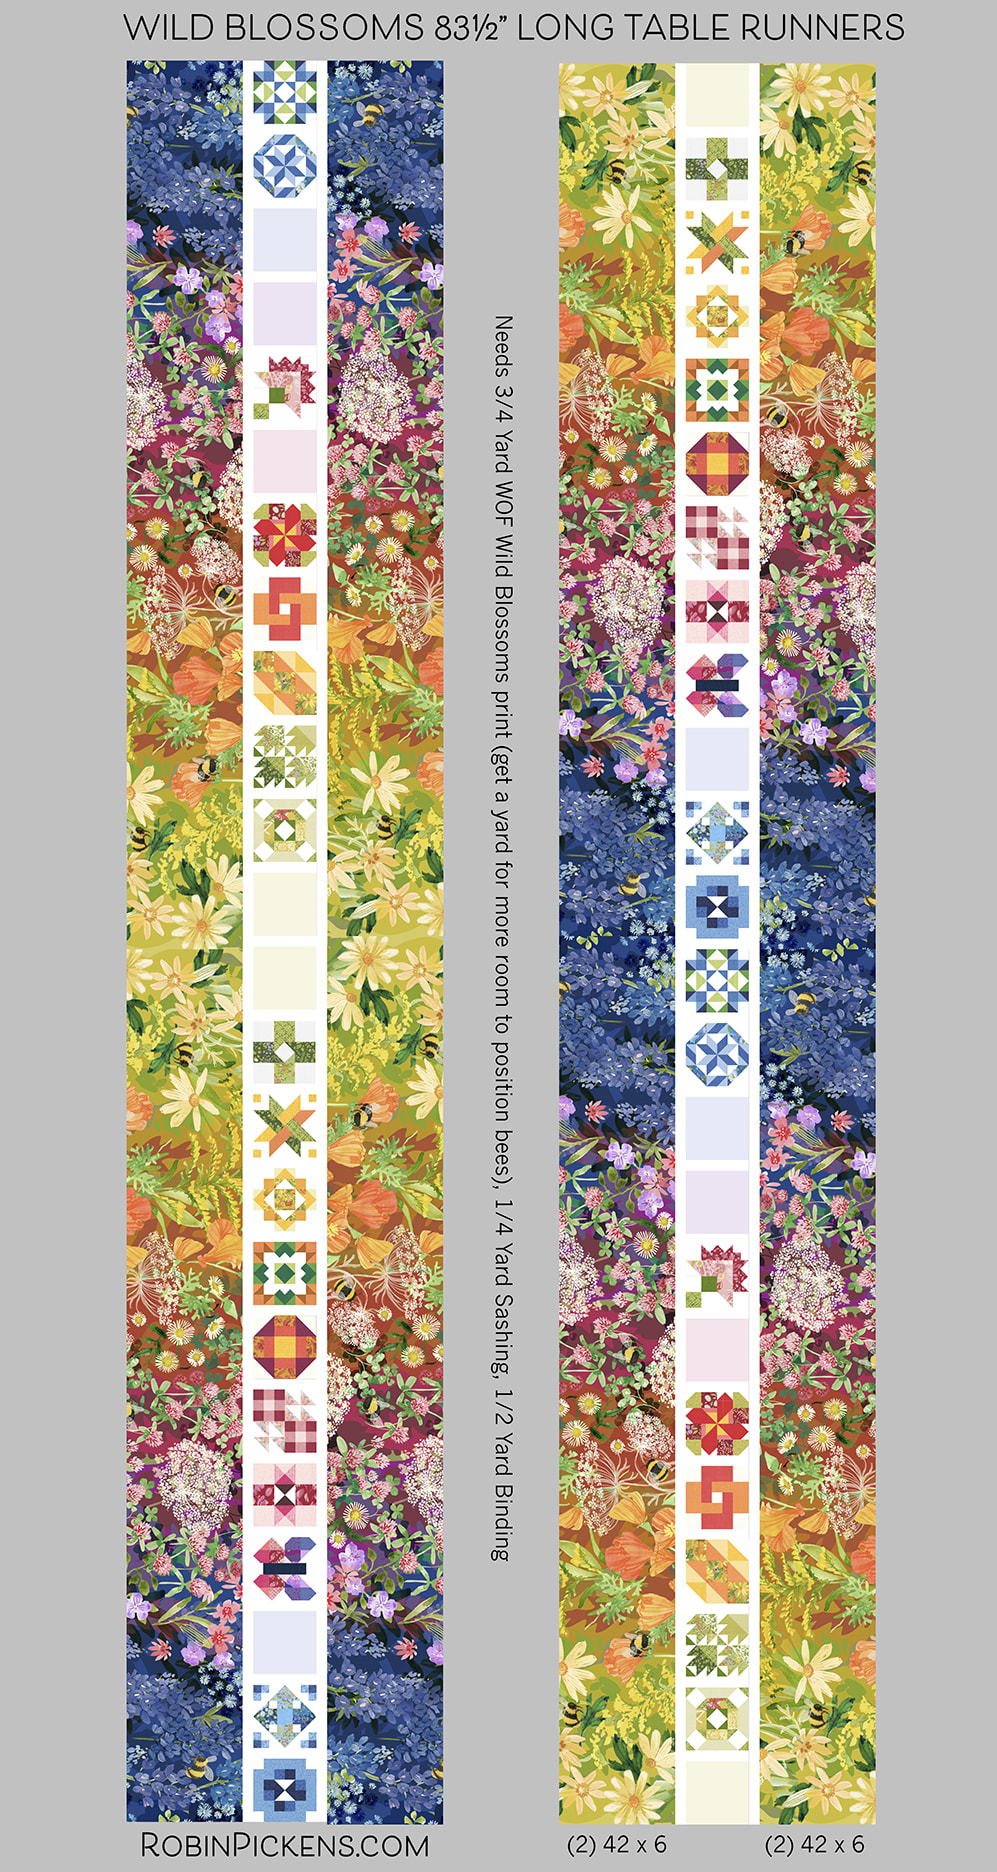 Wild Blossoms and Sewcialites2 sewalong Table Runners Robin Pickens 2